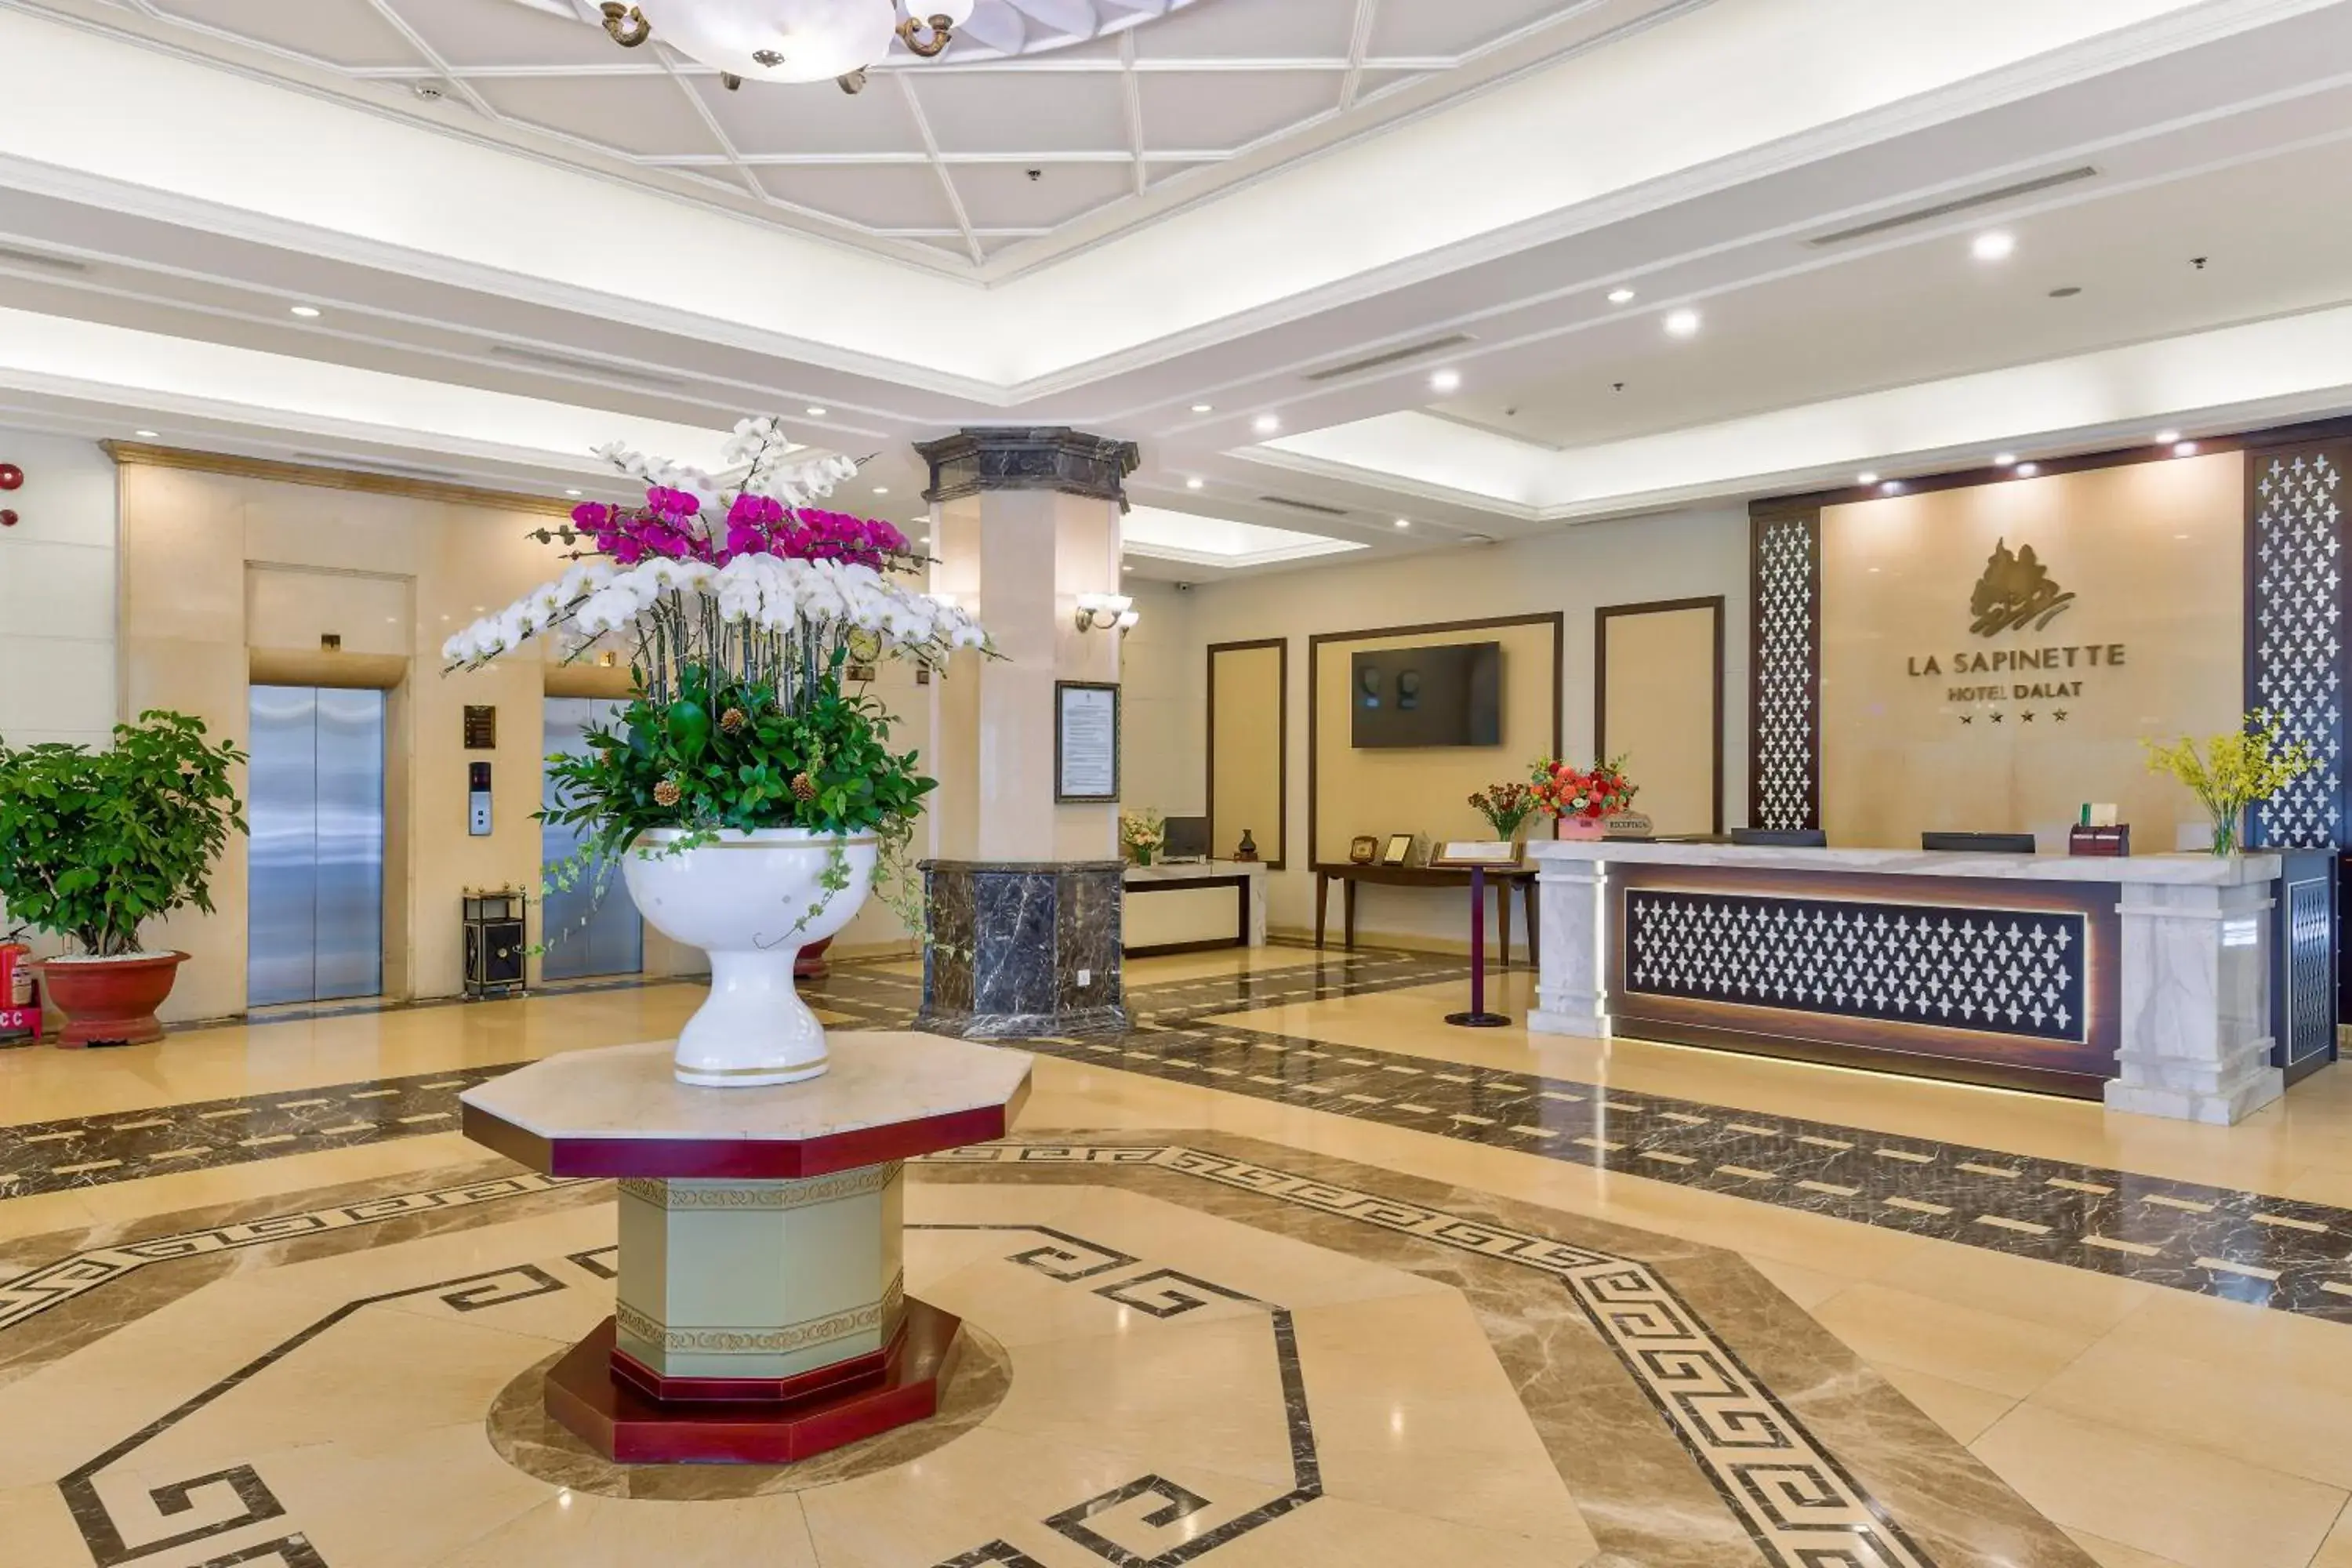 Meeting/conference room, Lobby/Reception in La Sapinette Hotel